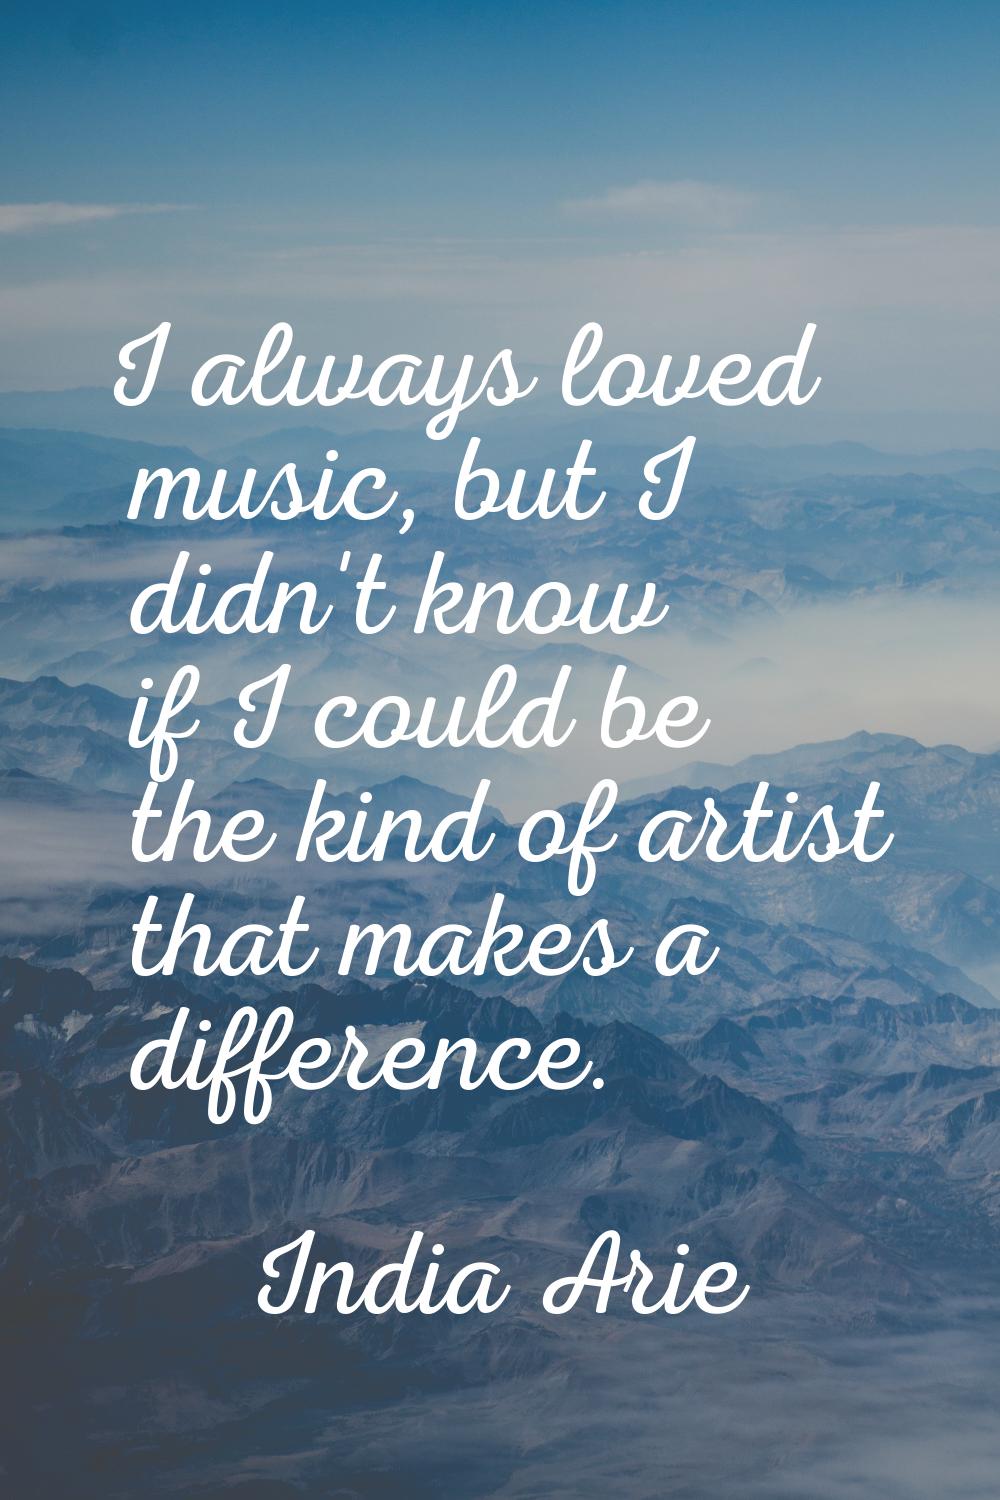 I always loved music, but I didn't know if I could be the kind of artist that makes a difference.